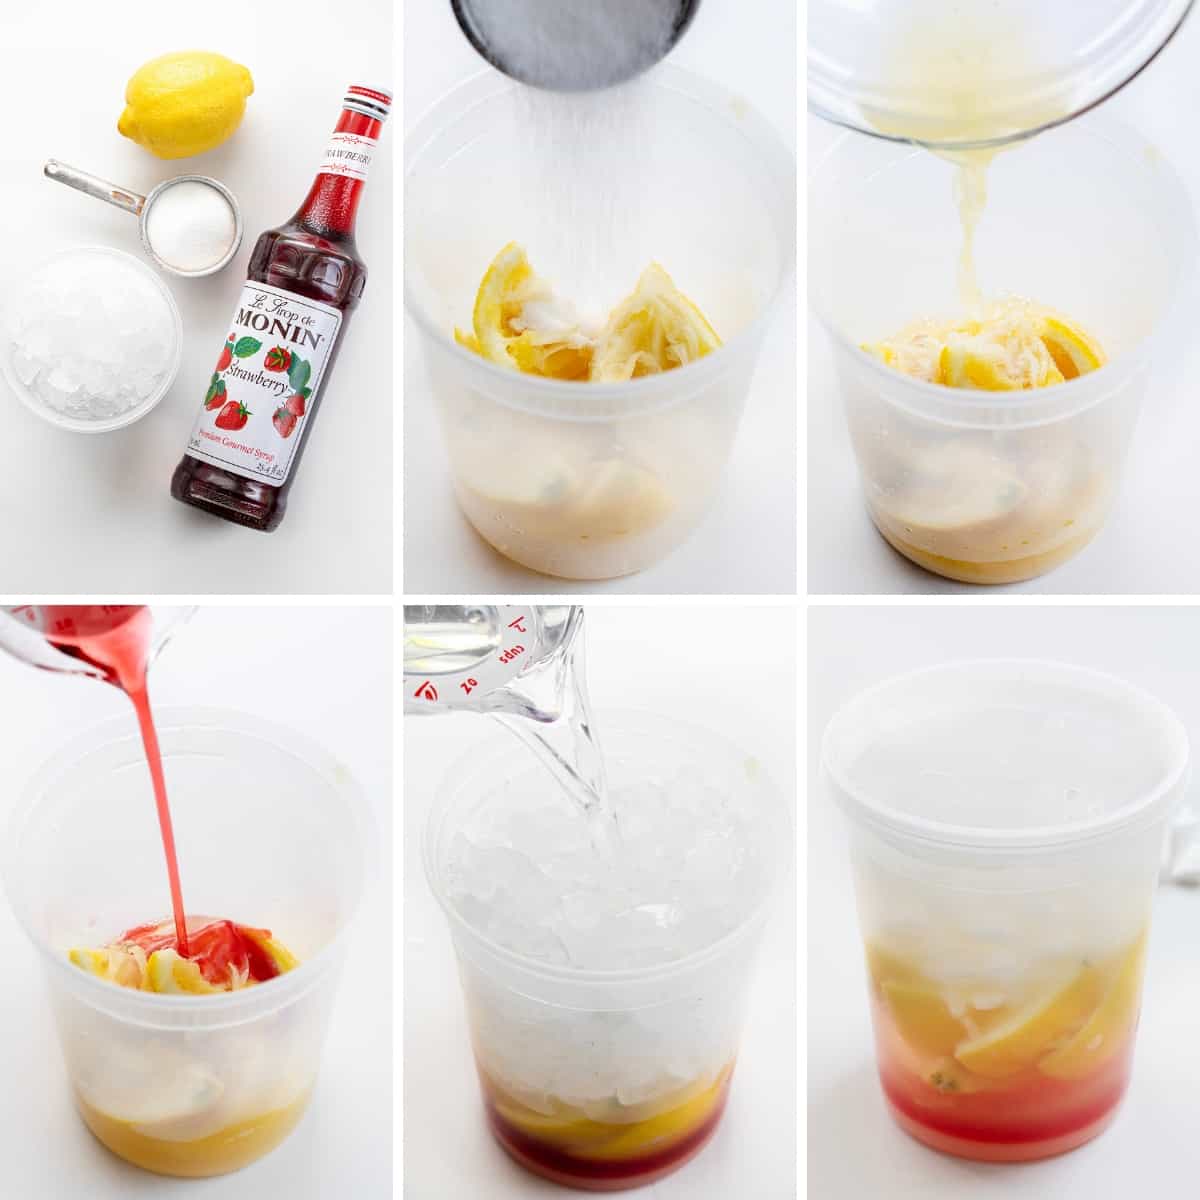 Steps for Creating a State Fair Strawberry Lemonade at Home with Equipment Used and Each Step of the Ingredient Process.